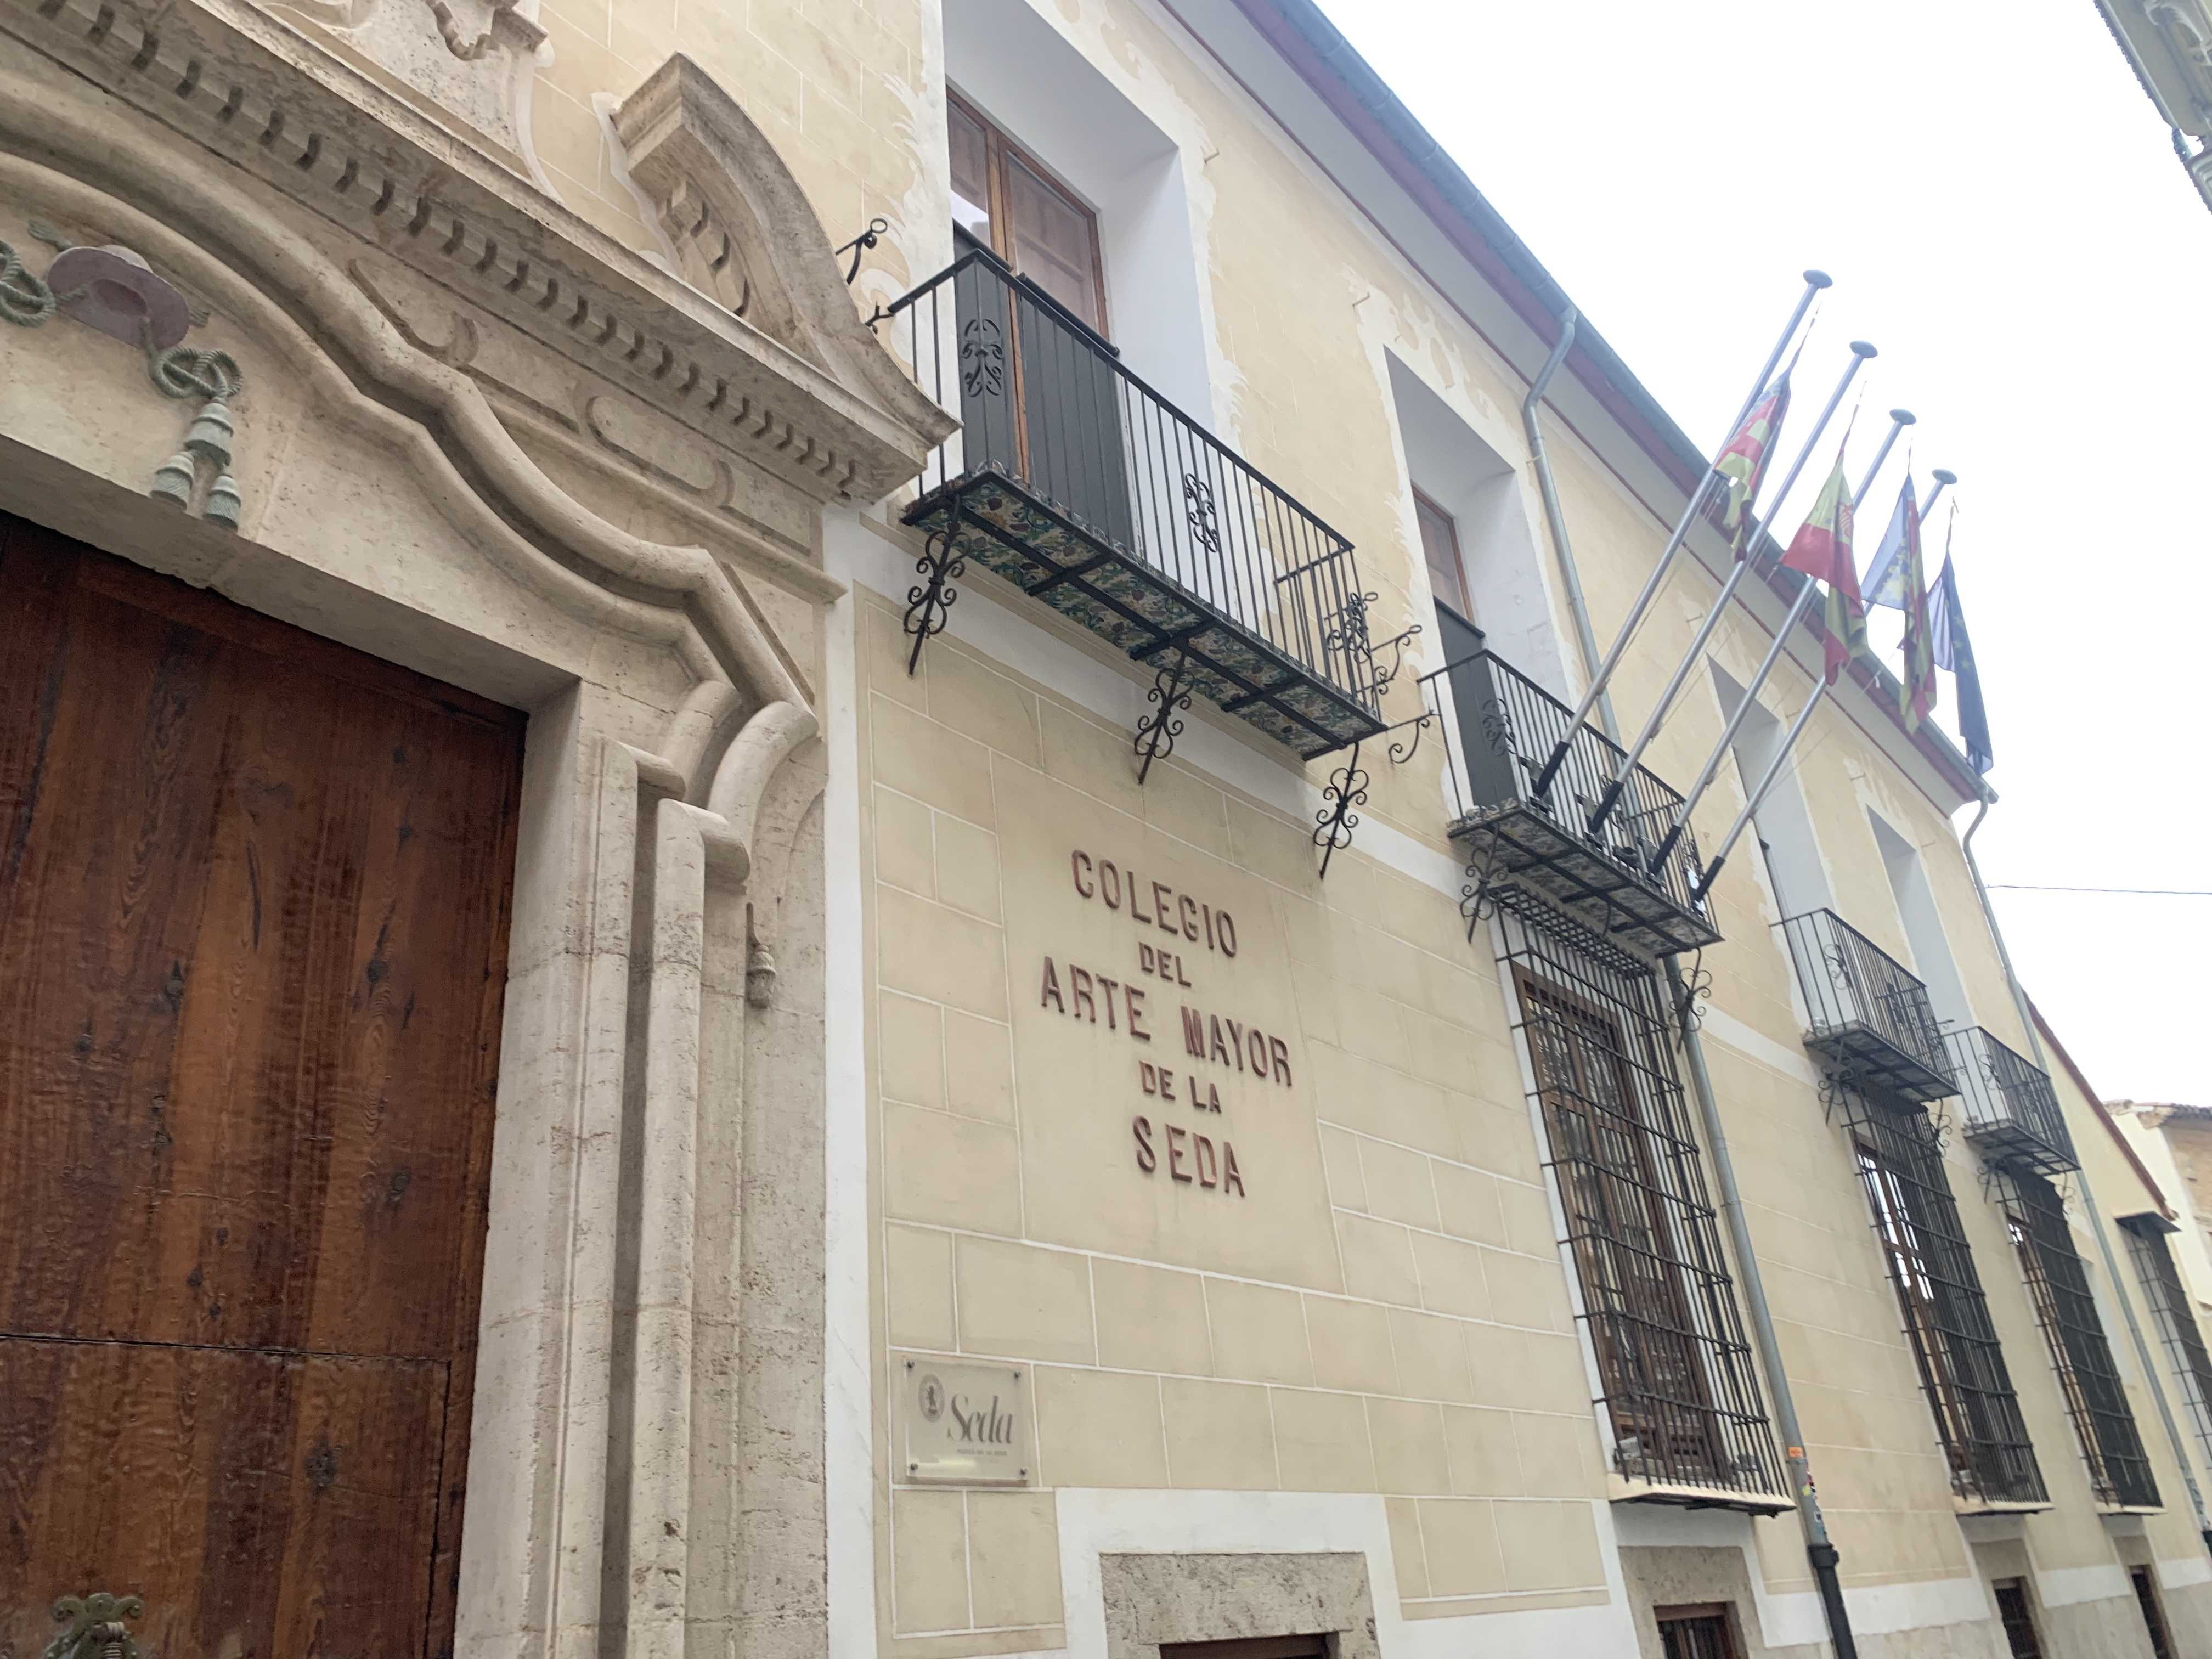 Museum and College of High Silk Art, Valencia